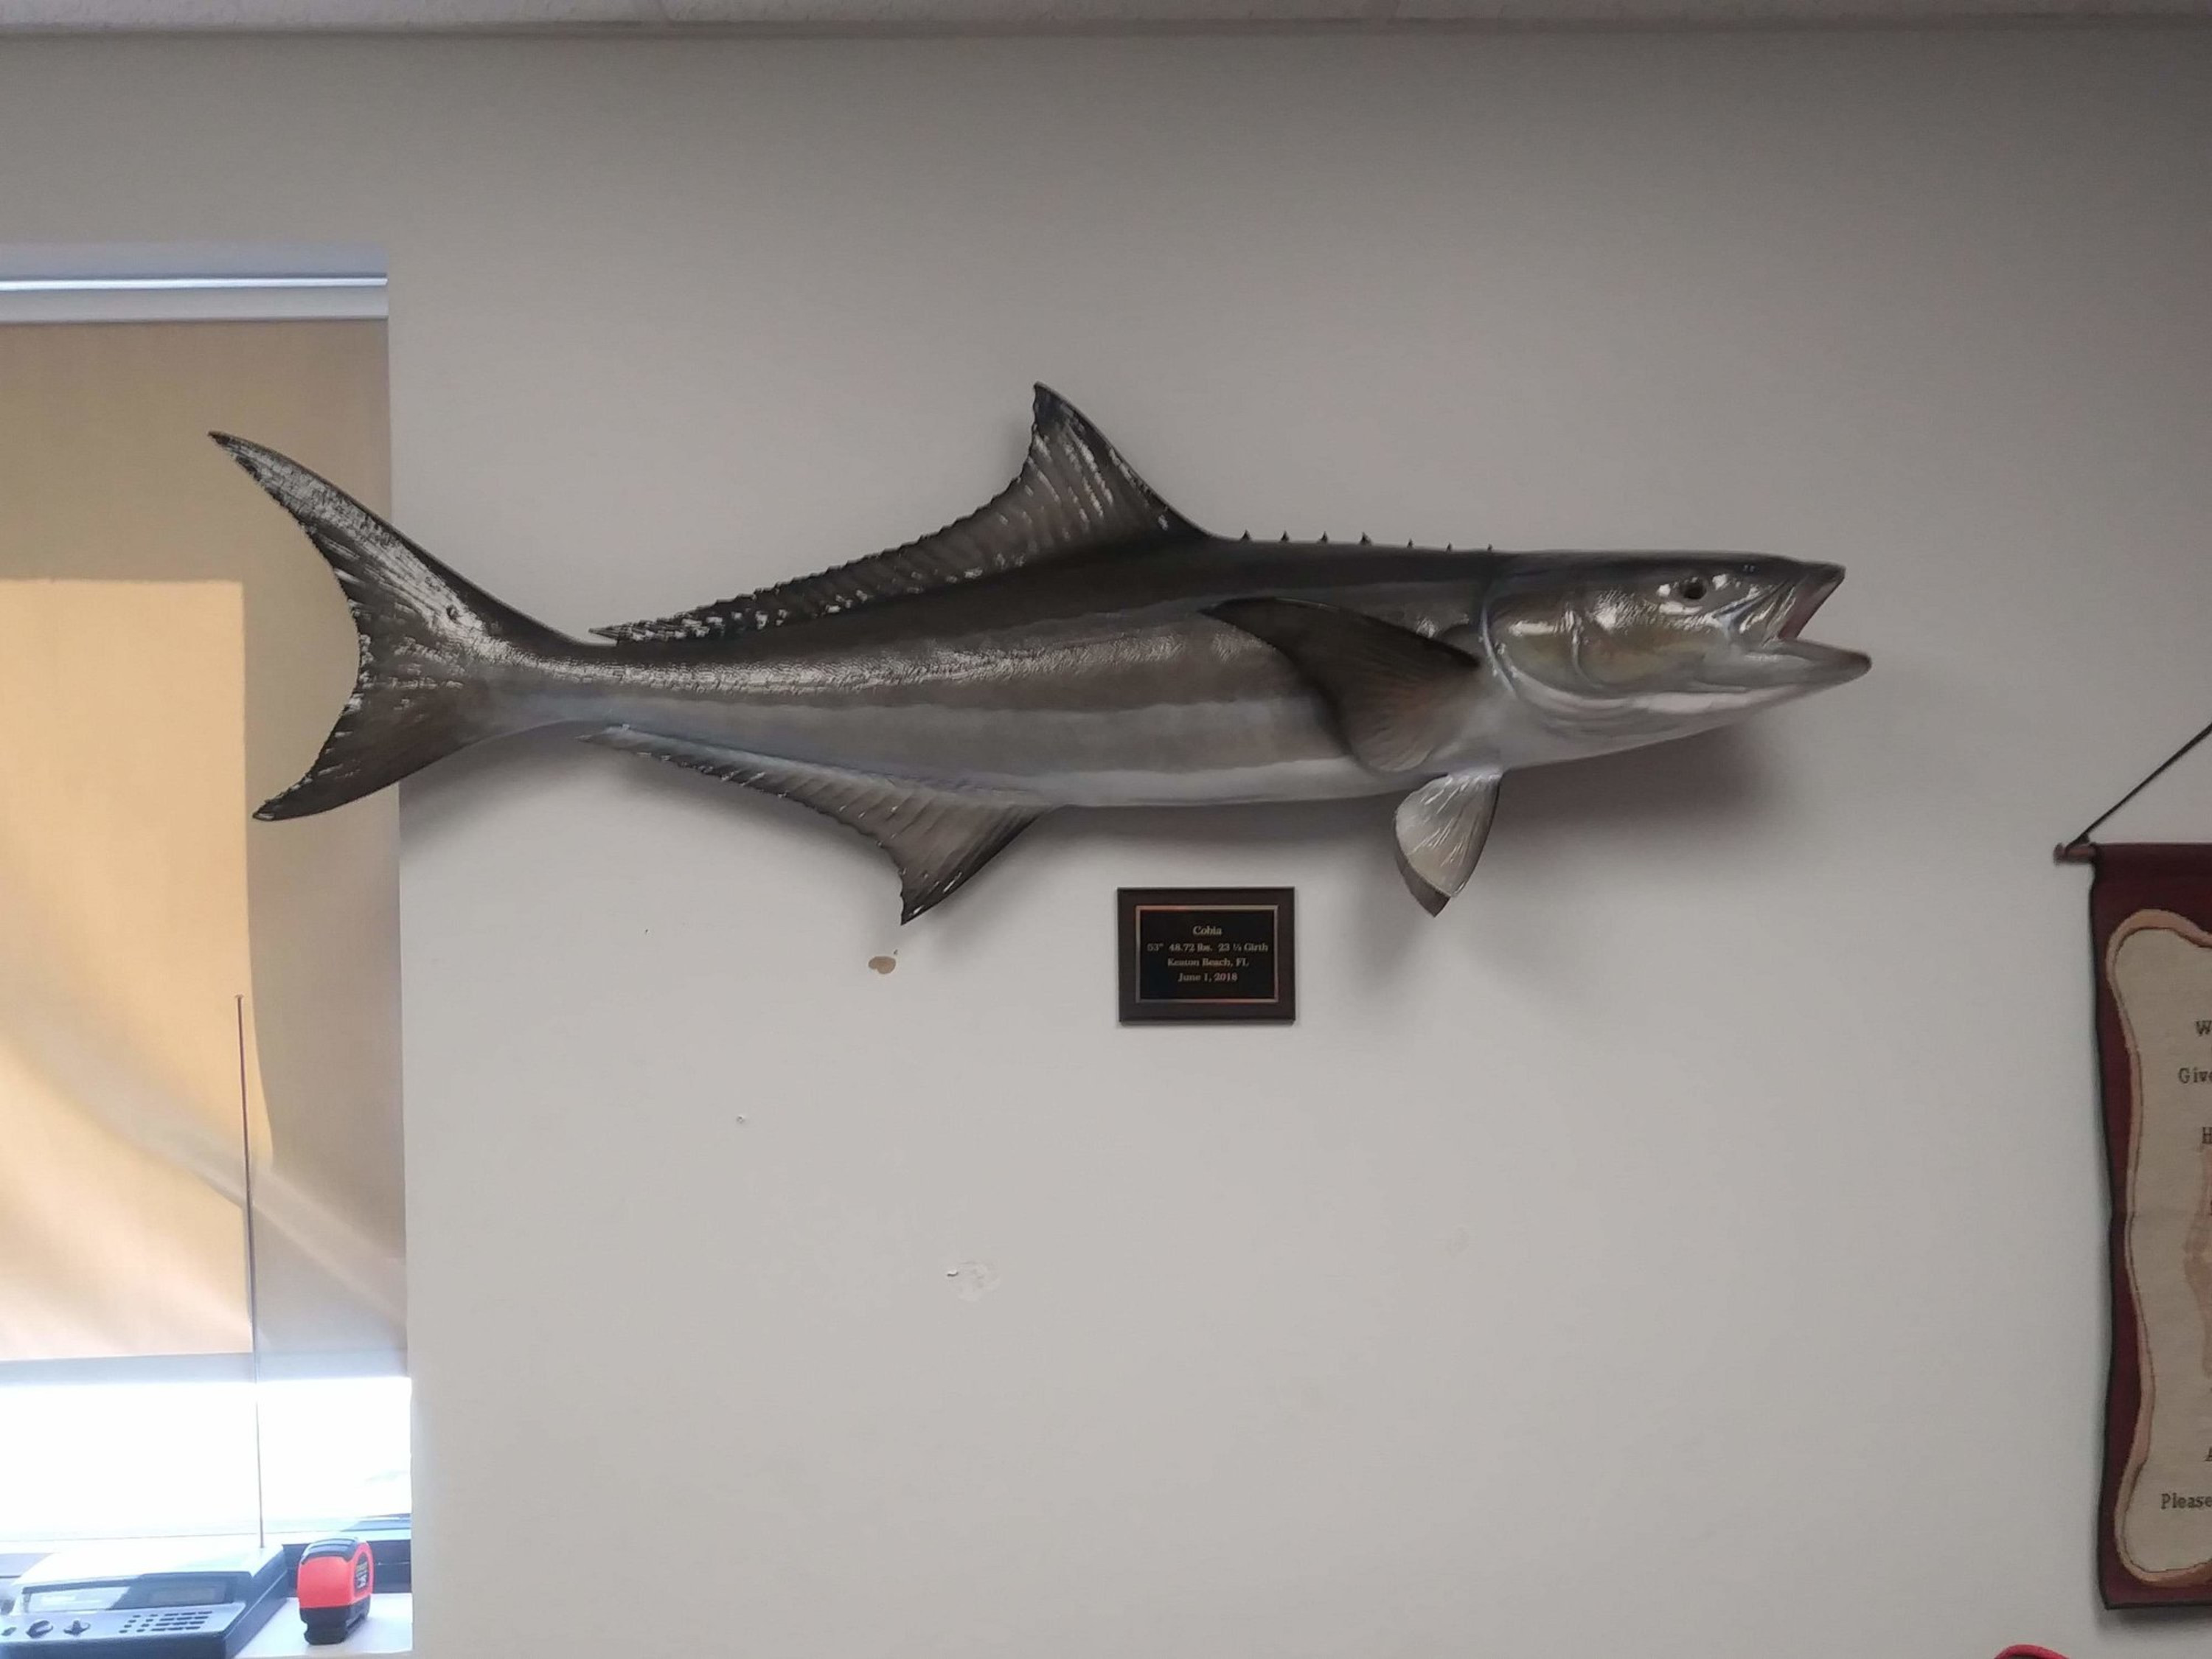 51-Inch Cobia Fish Mount